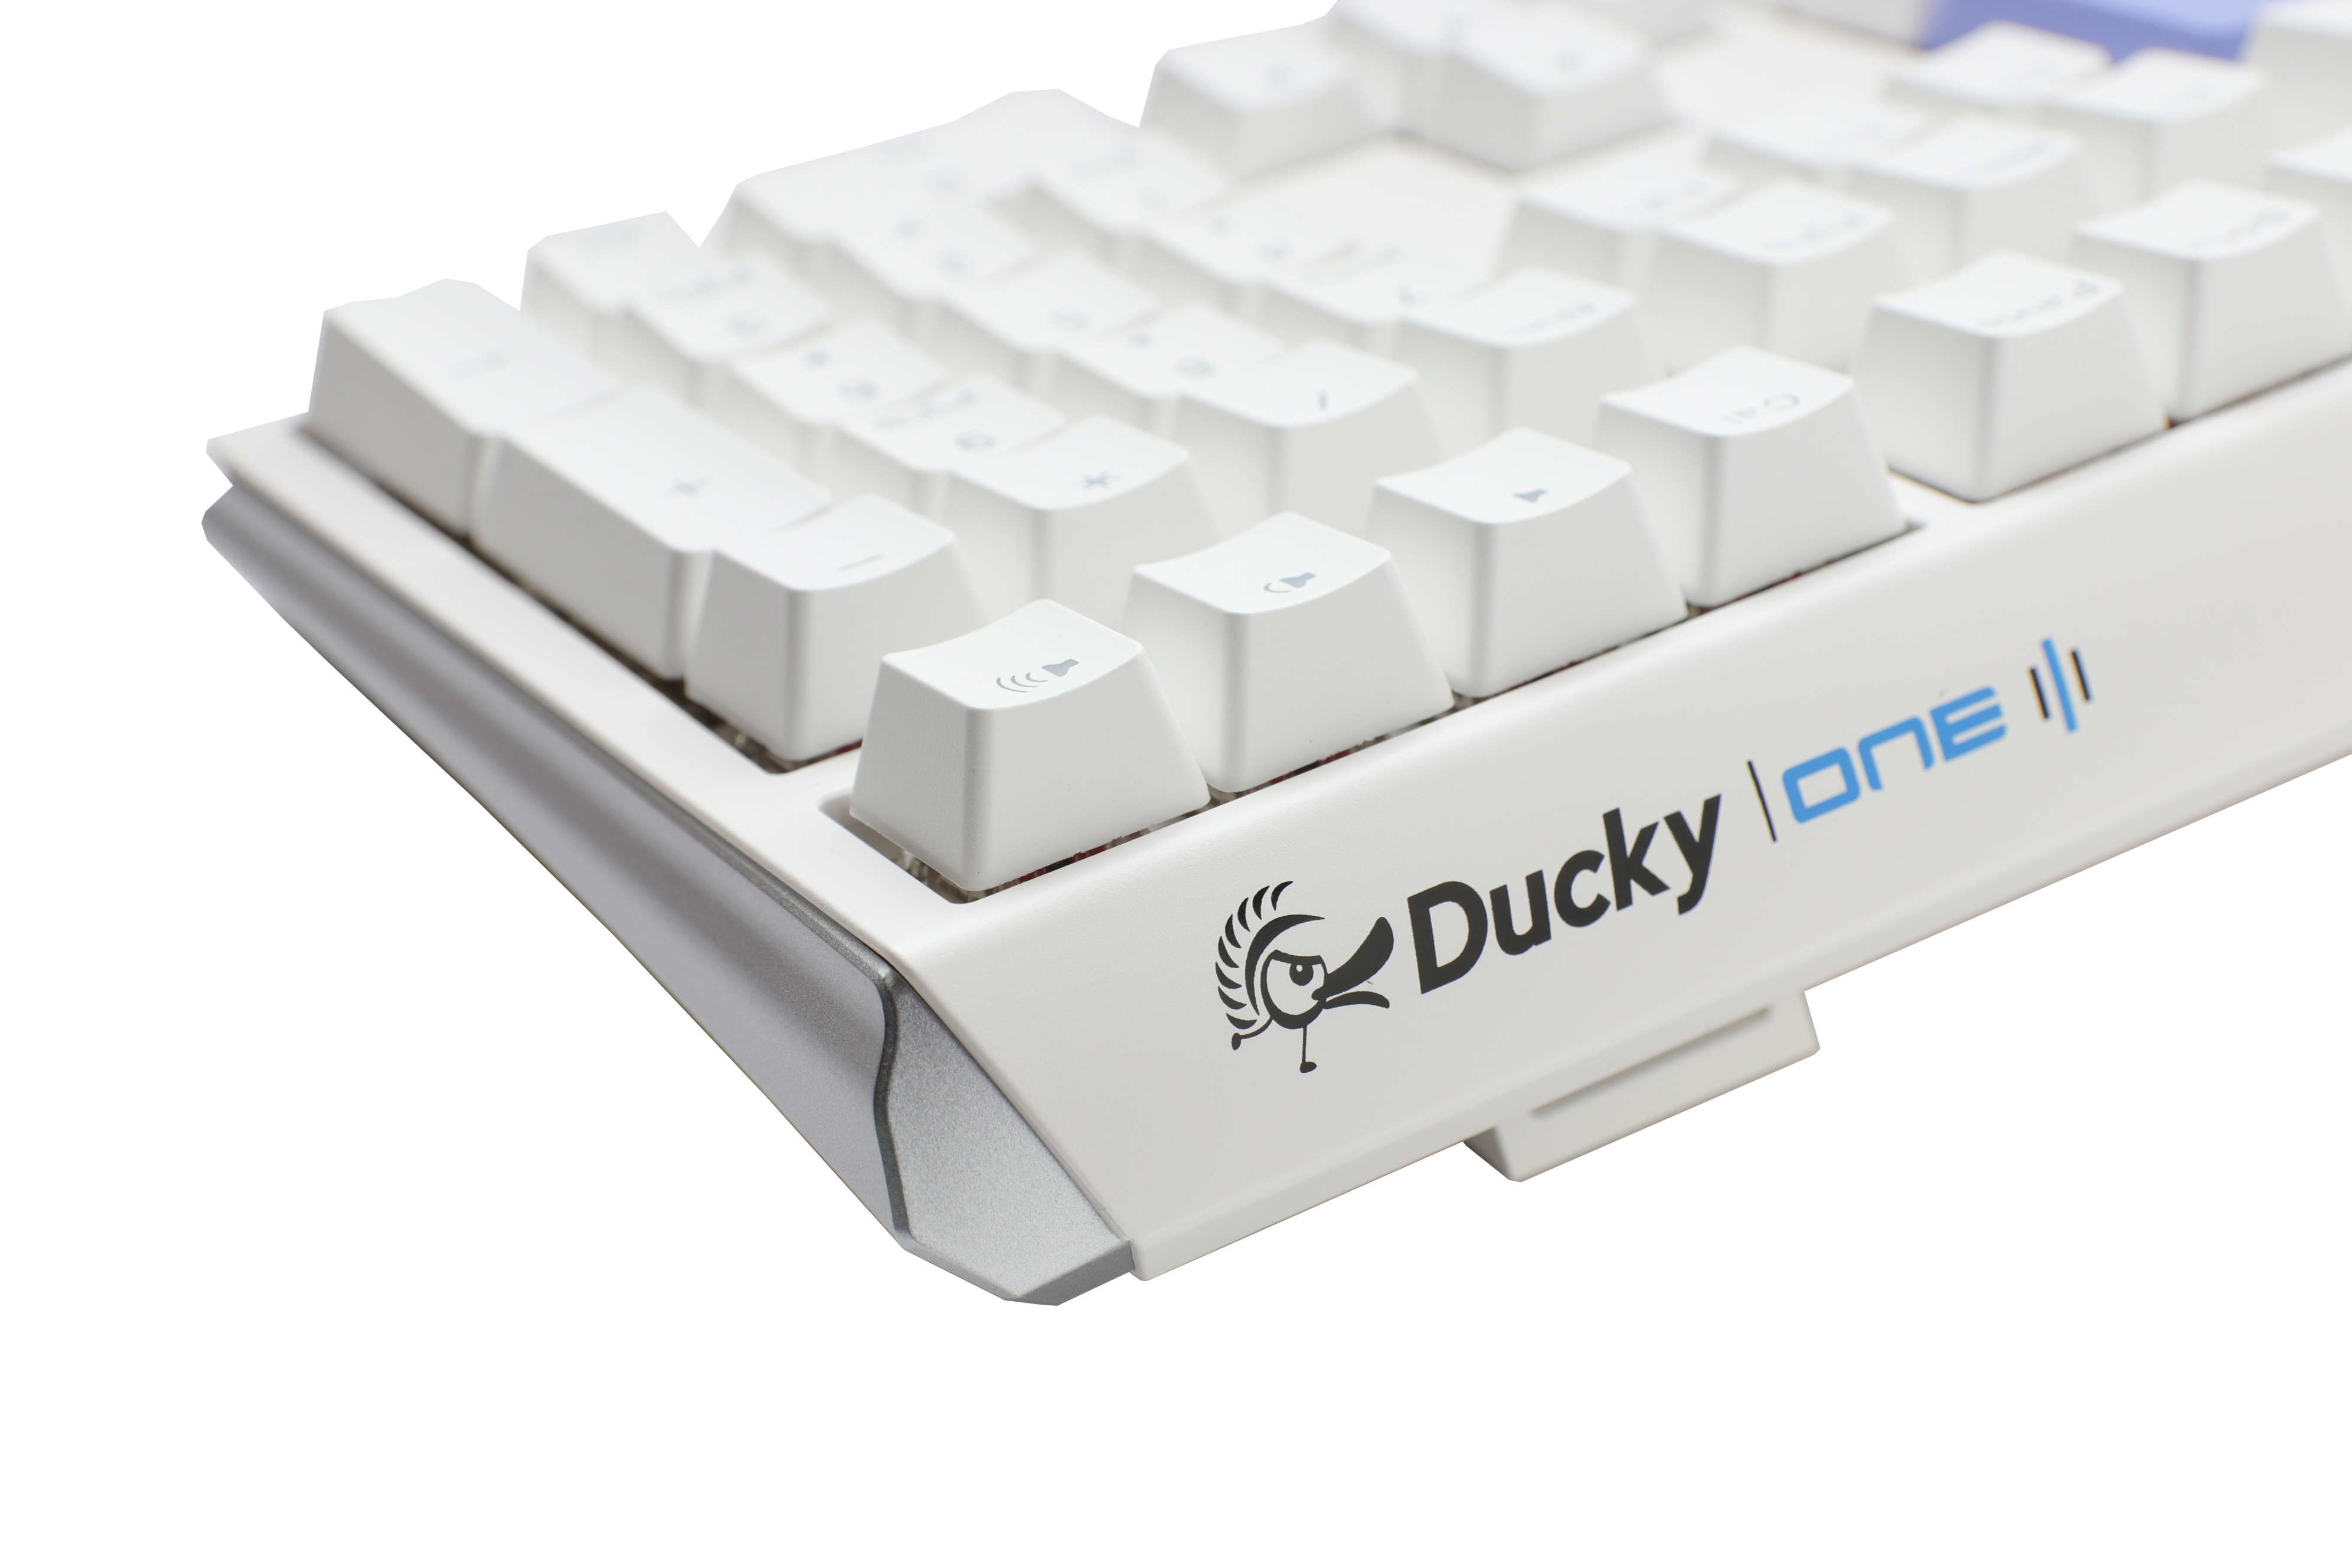 A close-up image of a white mechanical keyboard labeled "Ducky One 3 - Classic Pure White Nordic - Fullsize - Cherry Silent Red", showcasing the keyboard's layout, PBT keycaps, and branding on a light gray background.